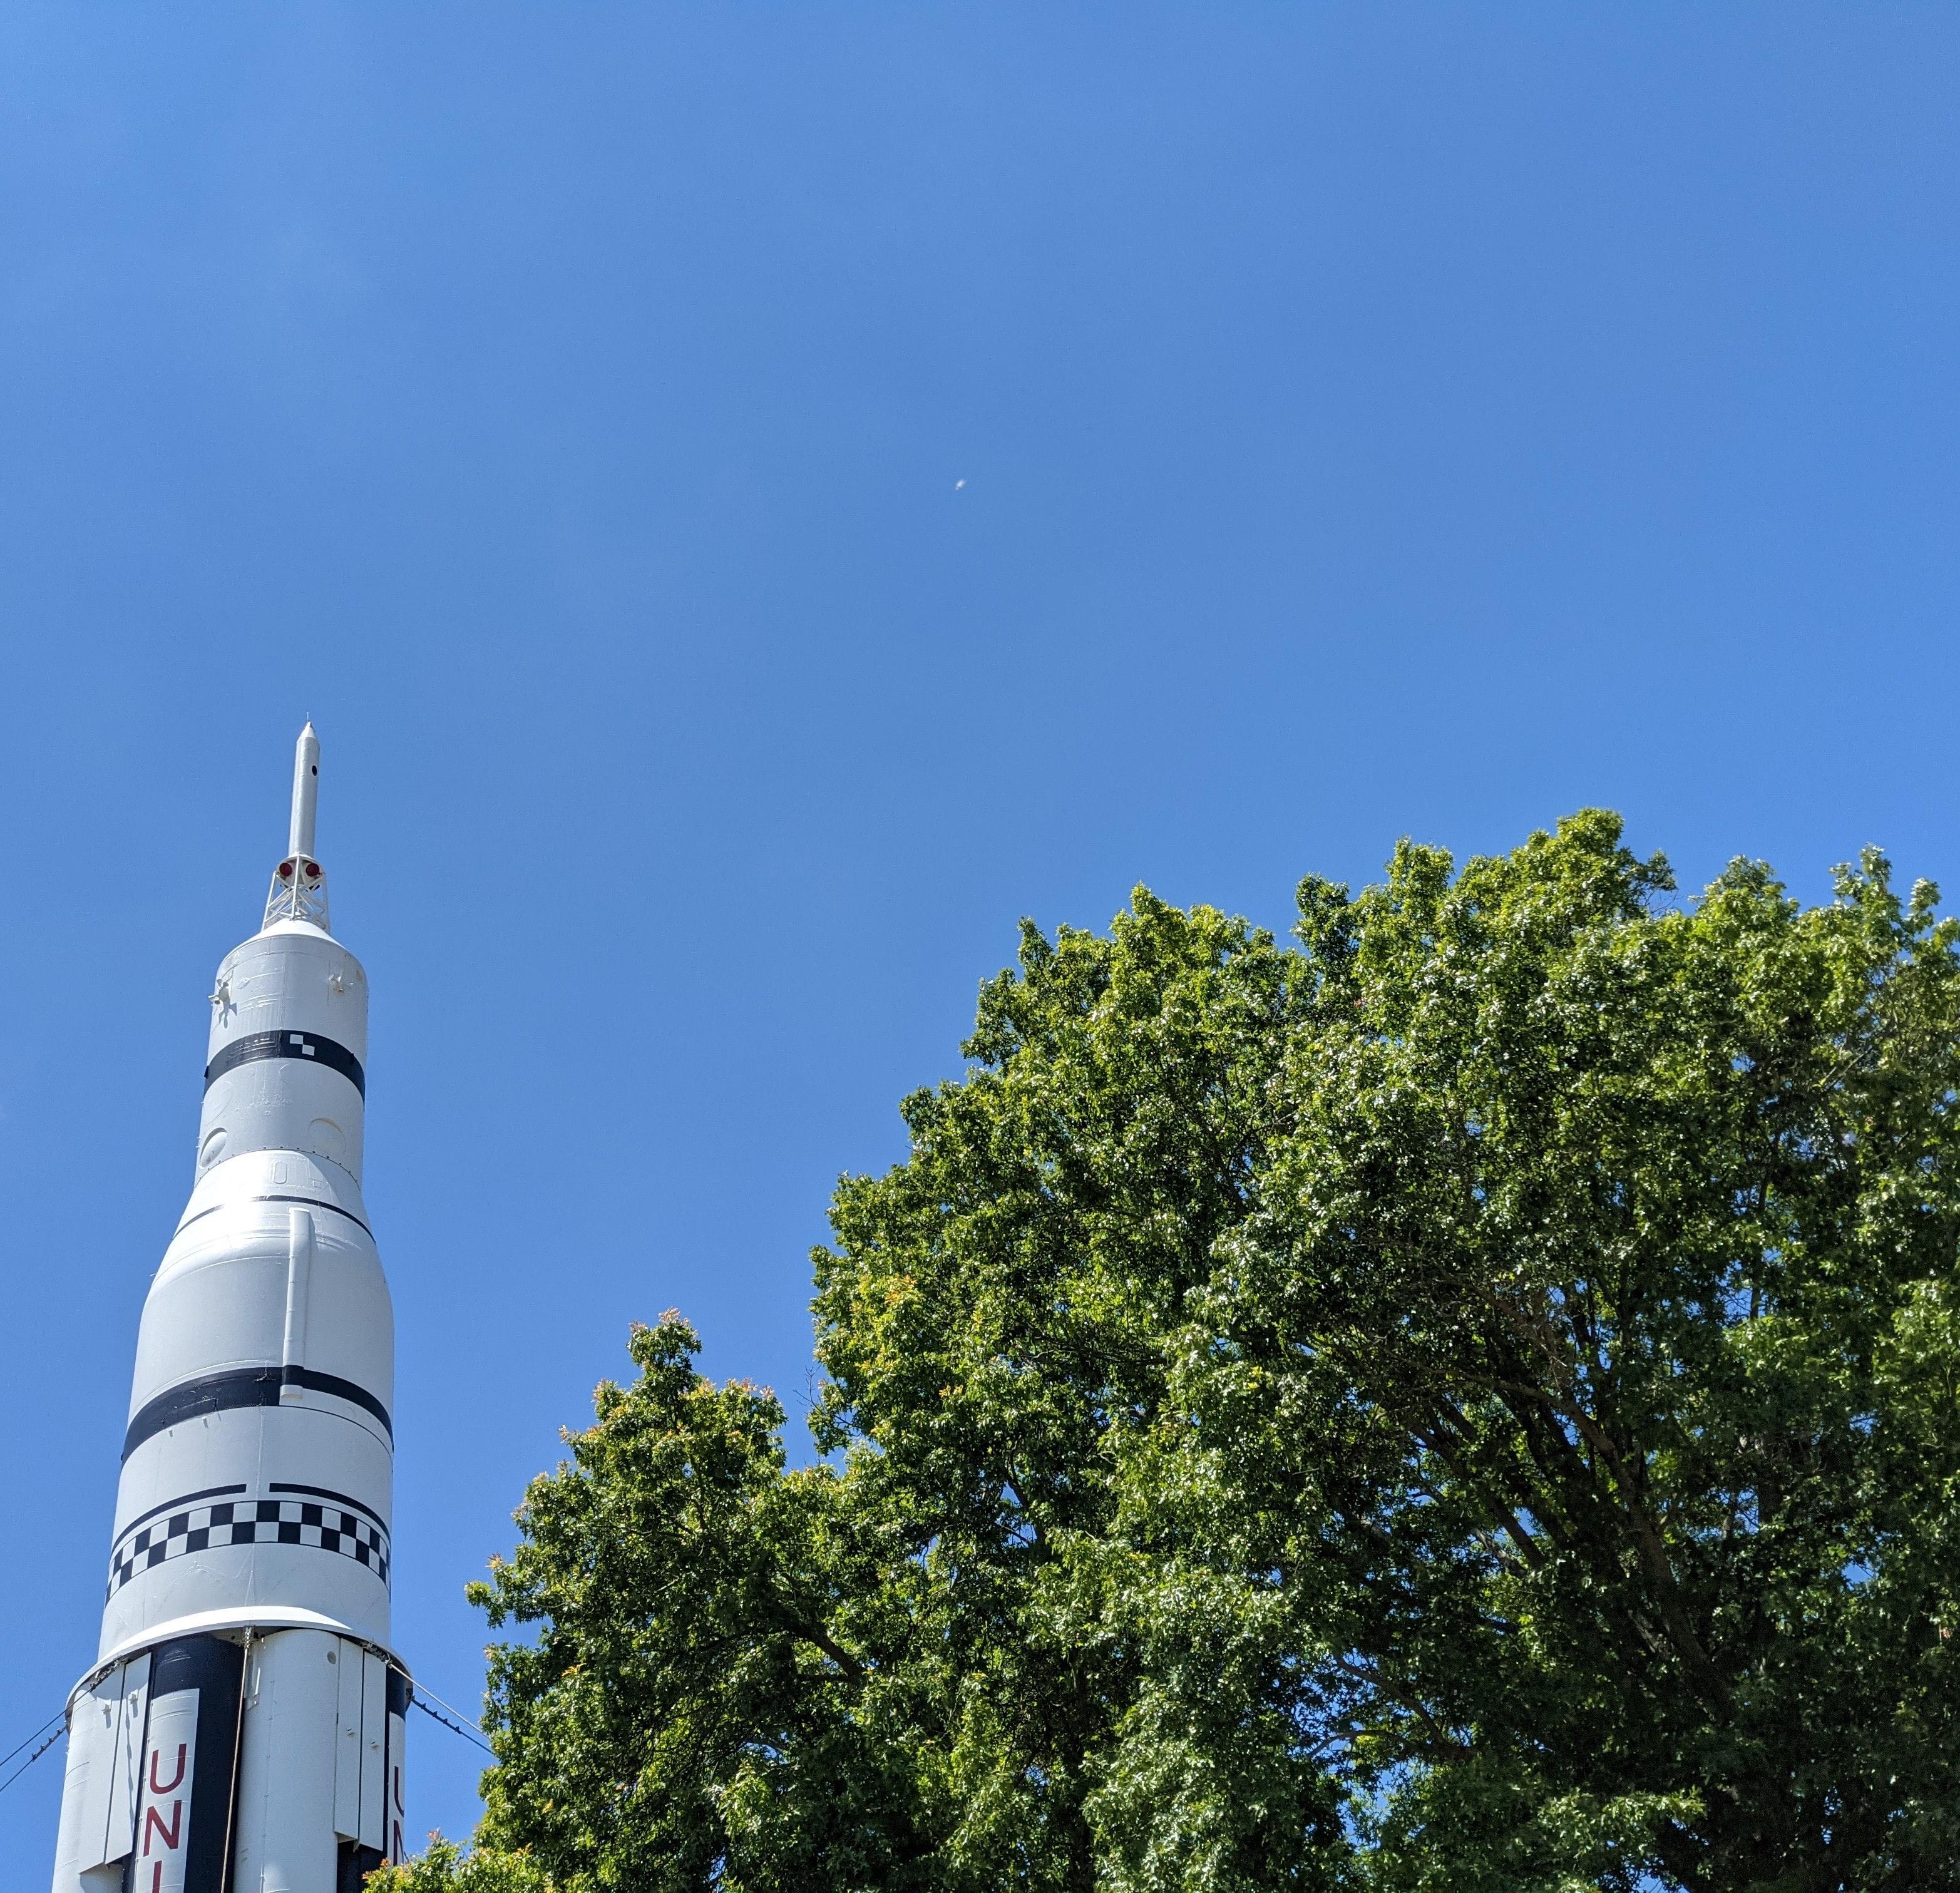 View of the Space and Rocket Center in Huntsville, Alabama.